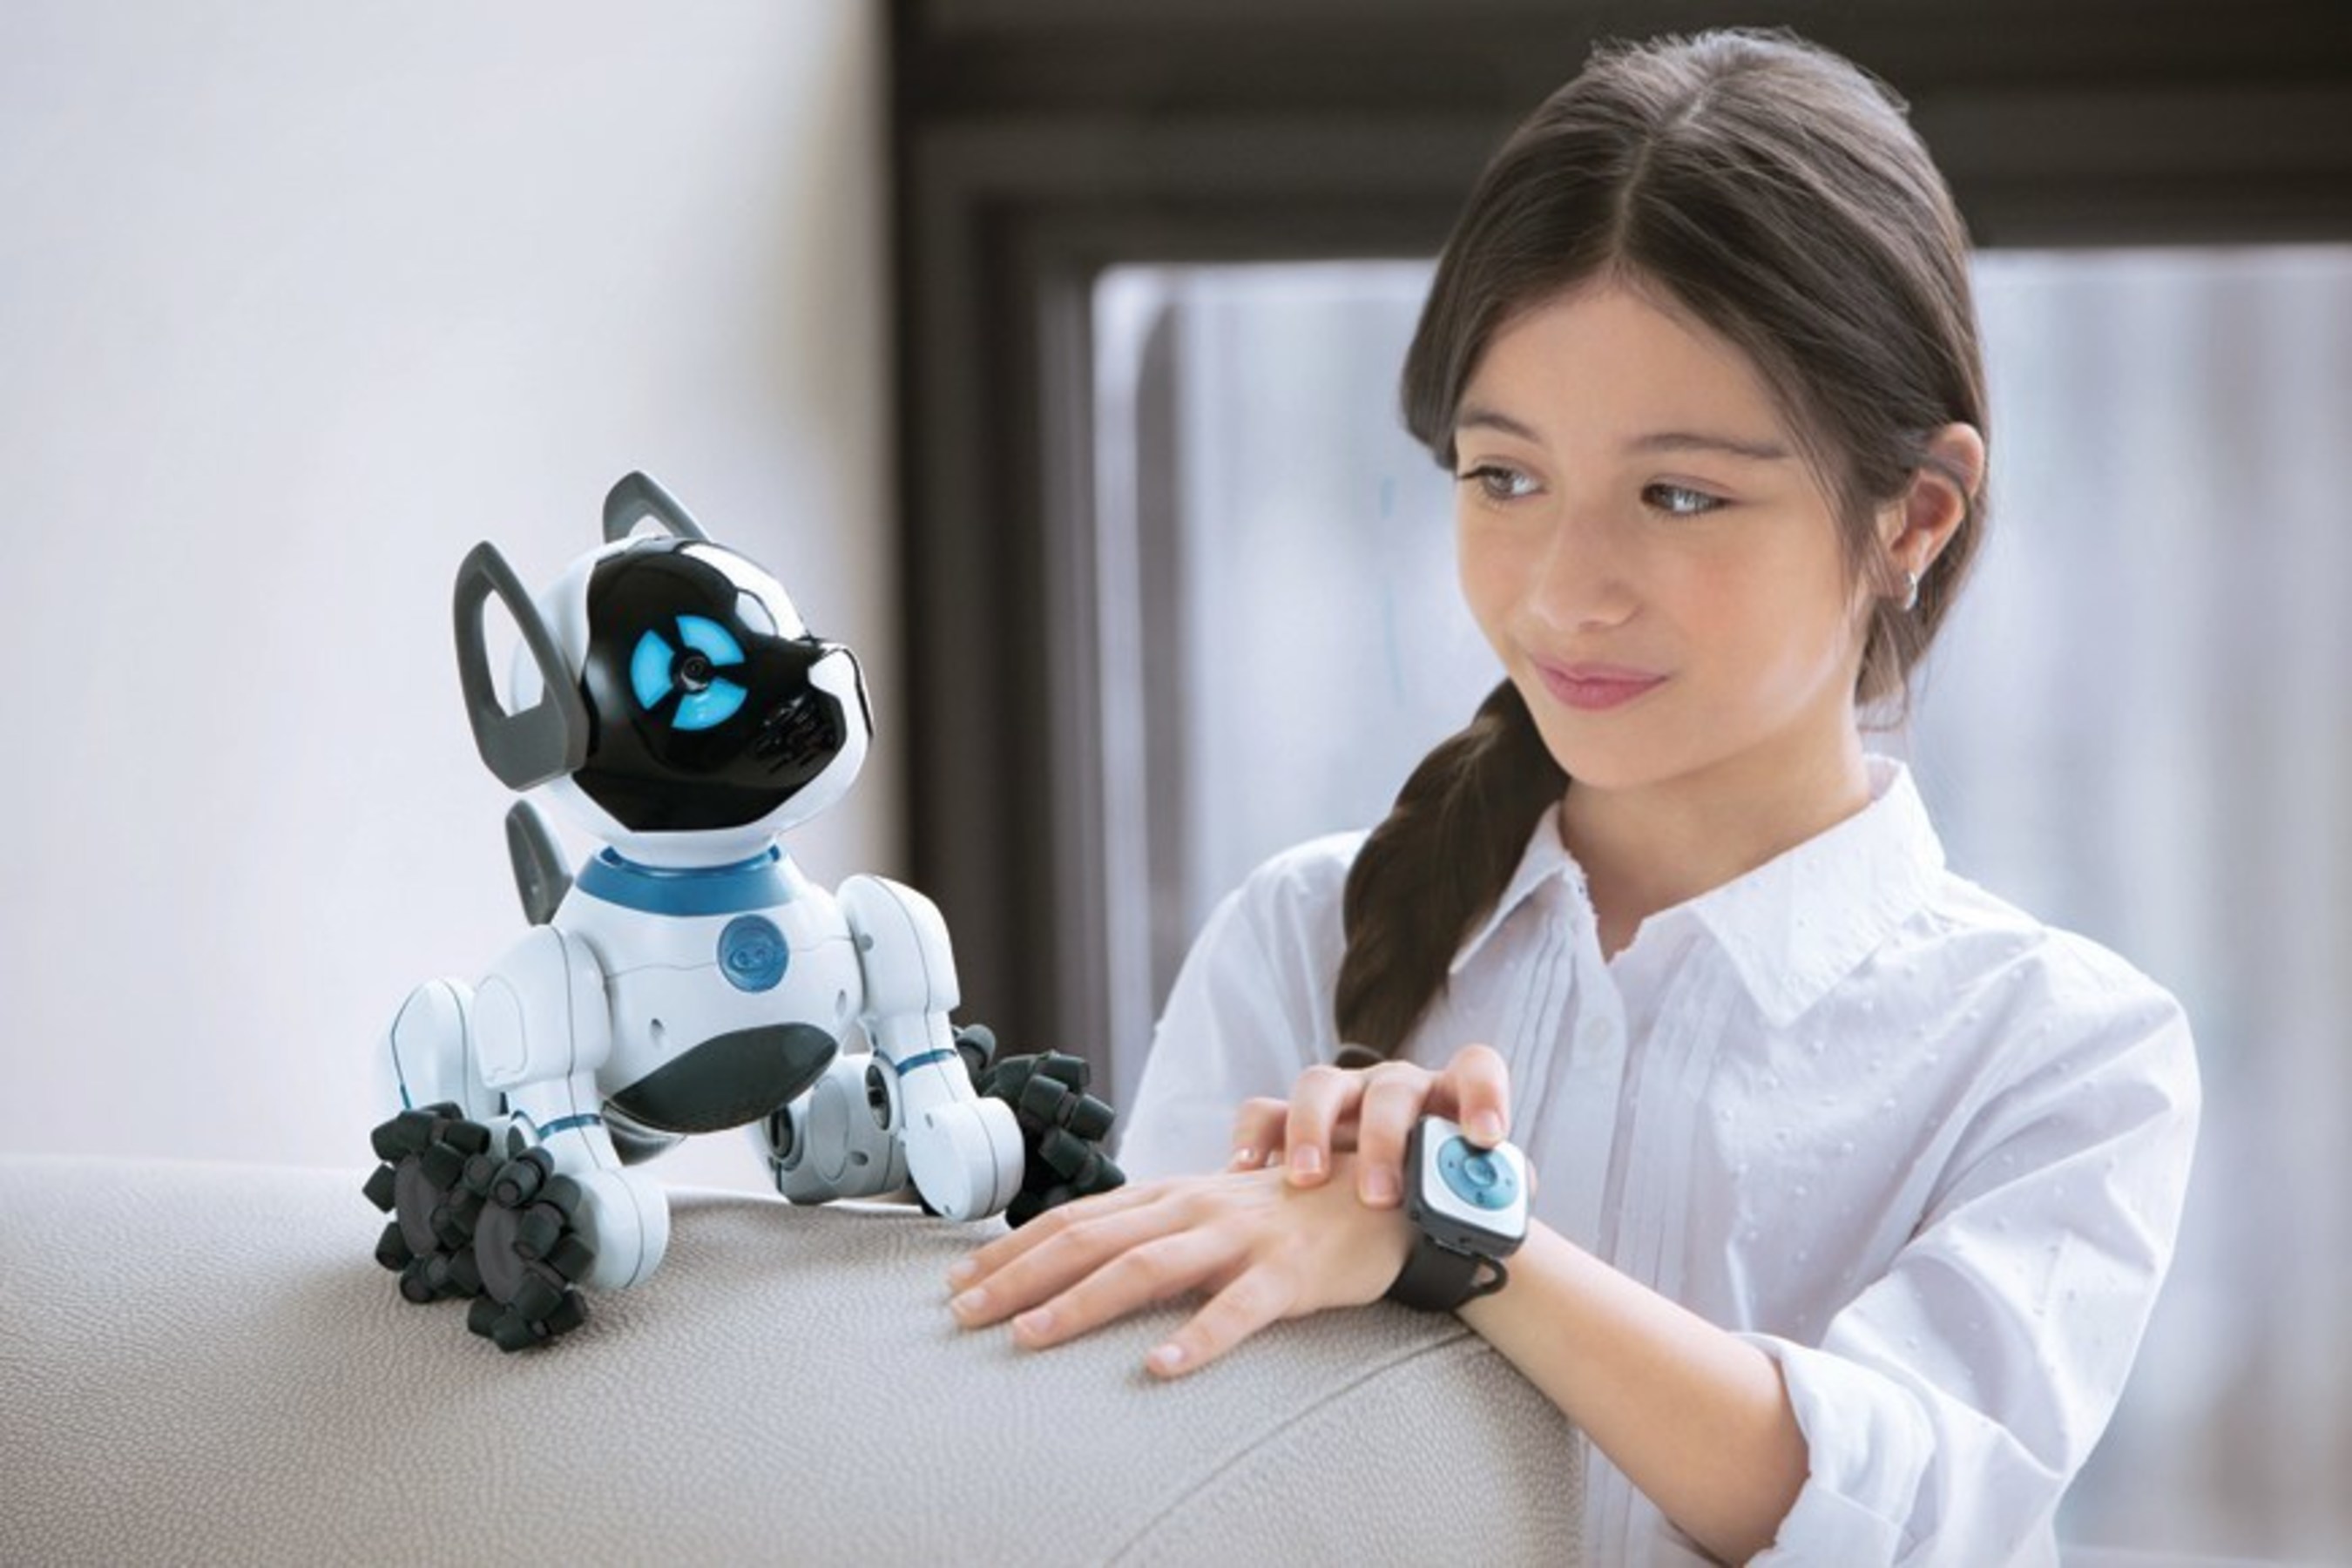 WowWee's CHiP can be controlled with the included SmartBand, Voice Recognition, and an updated, engaging app